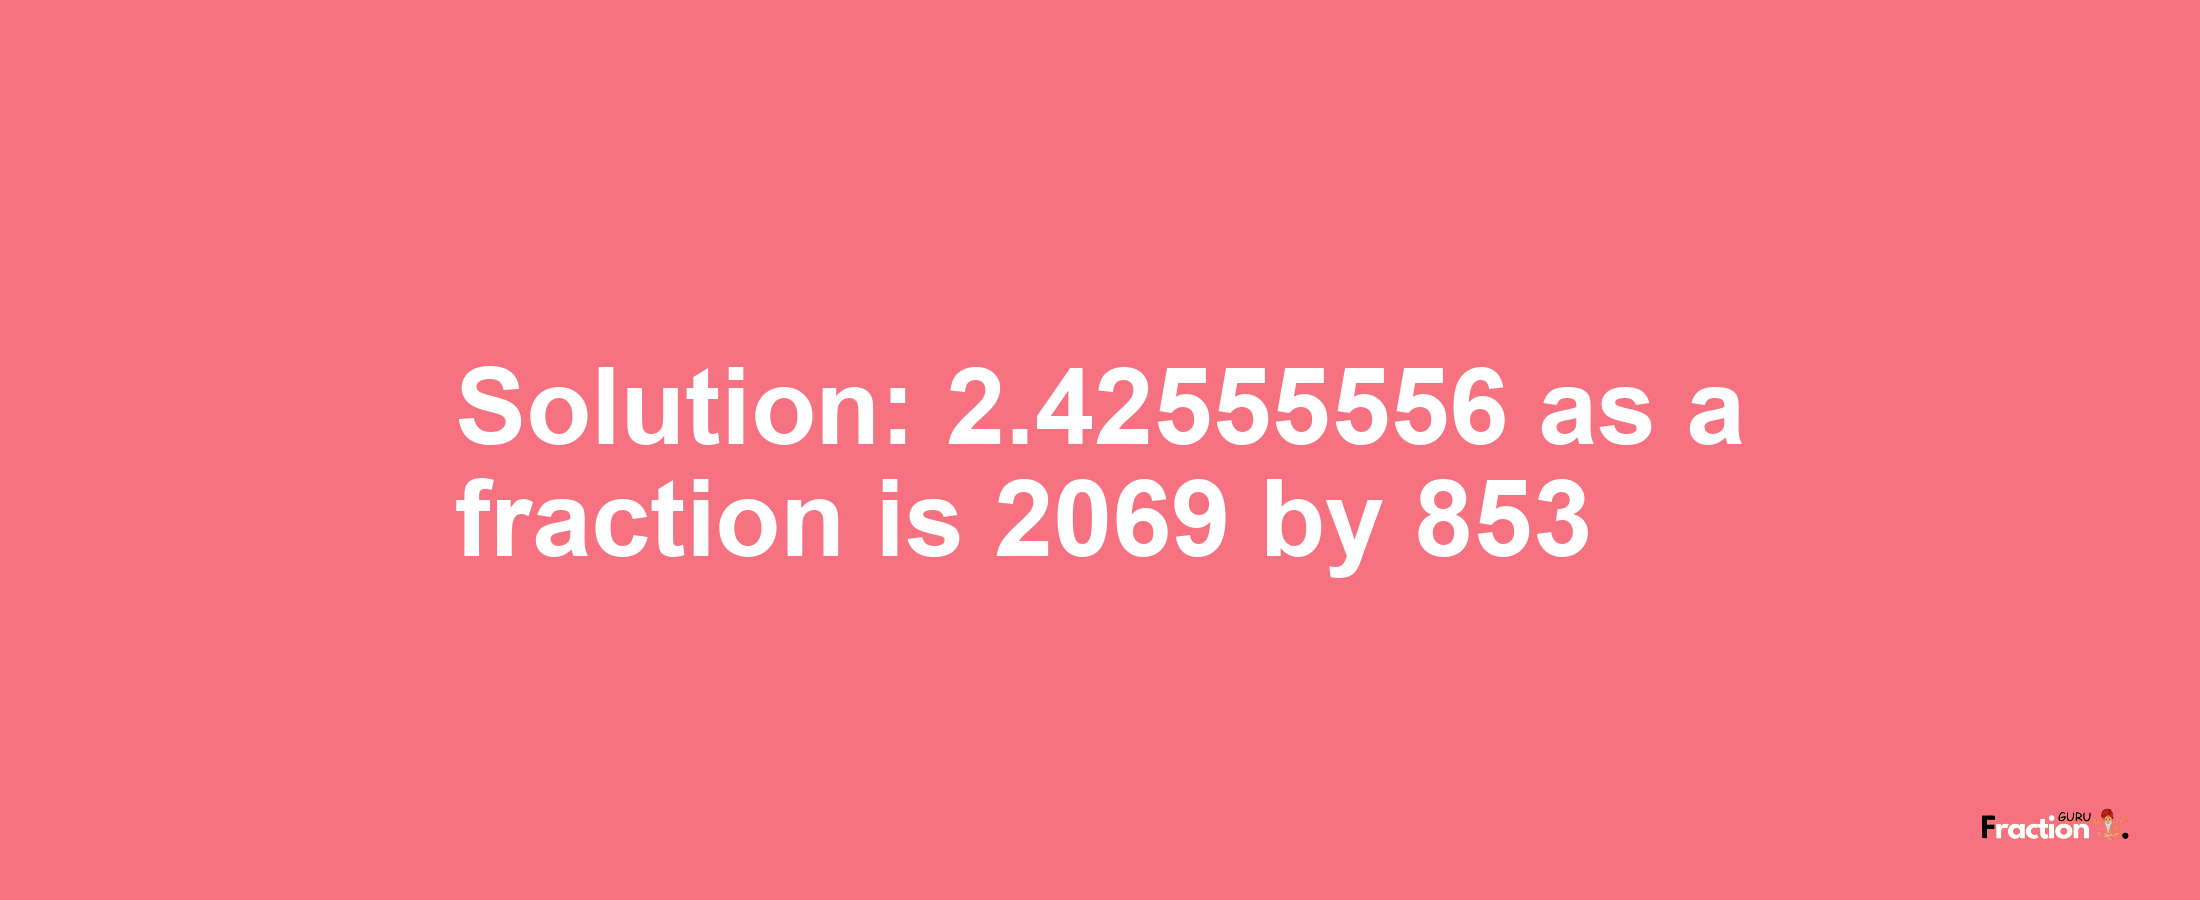 Solution:2.42555556 as a fraction is 2069/853